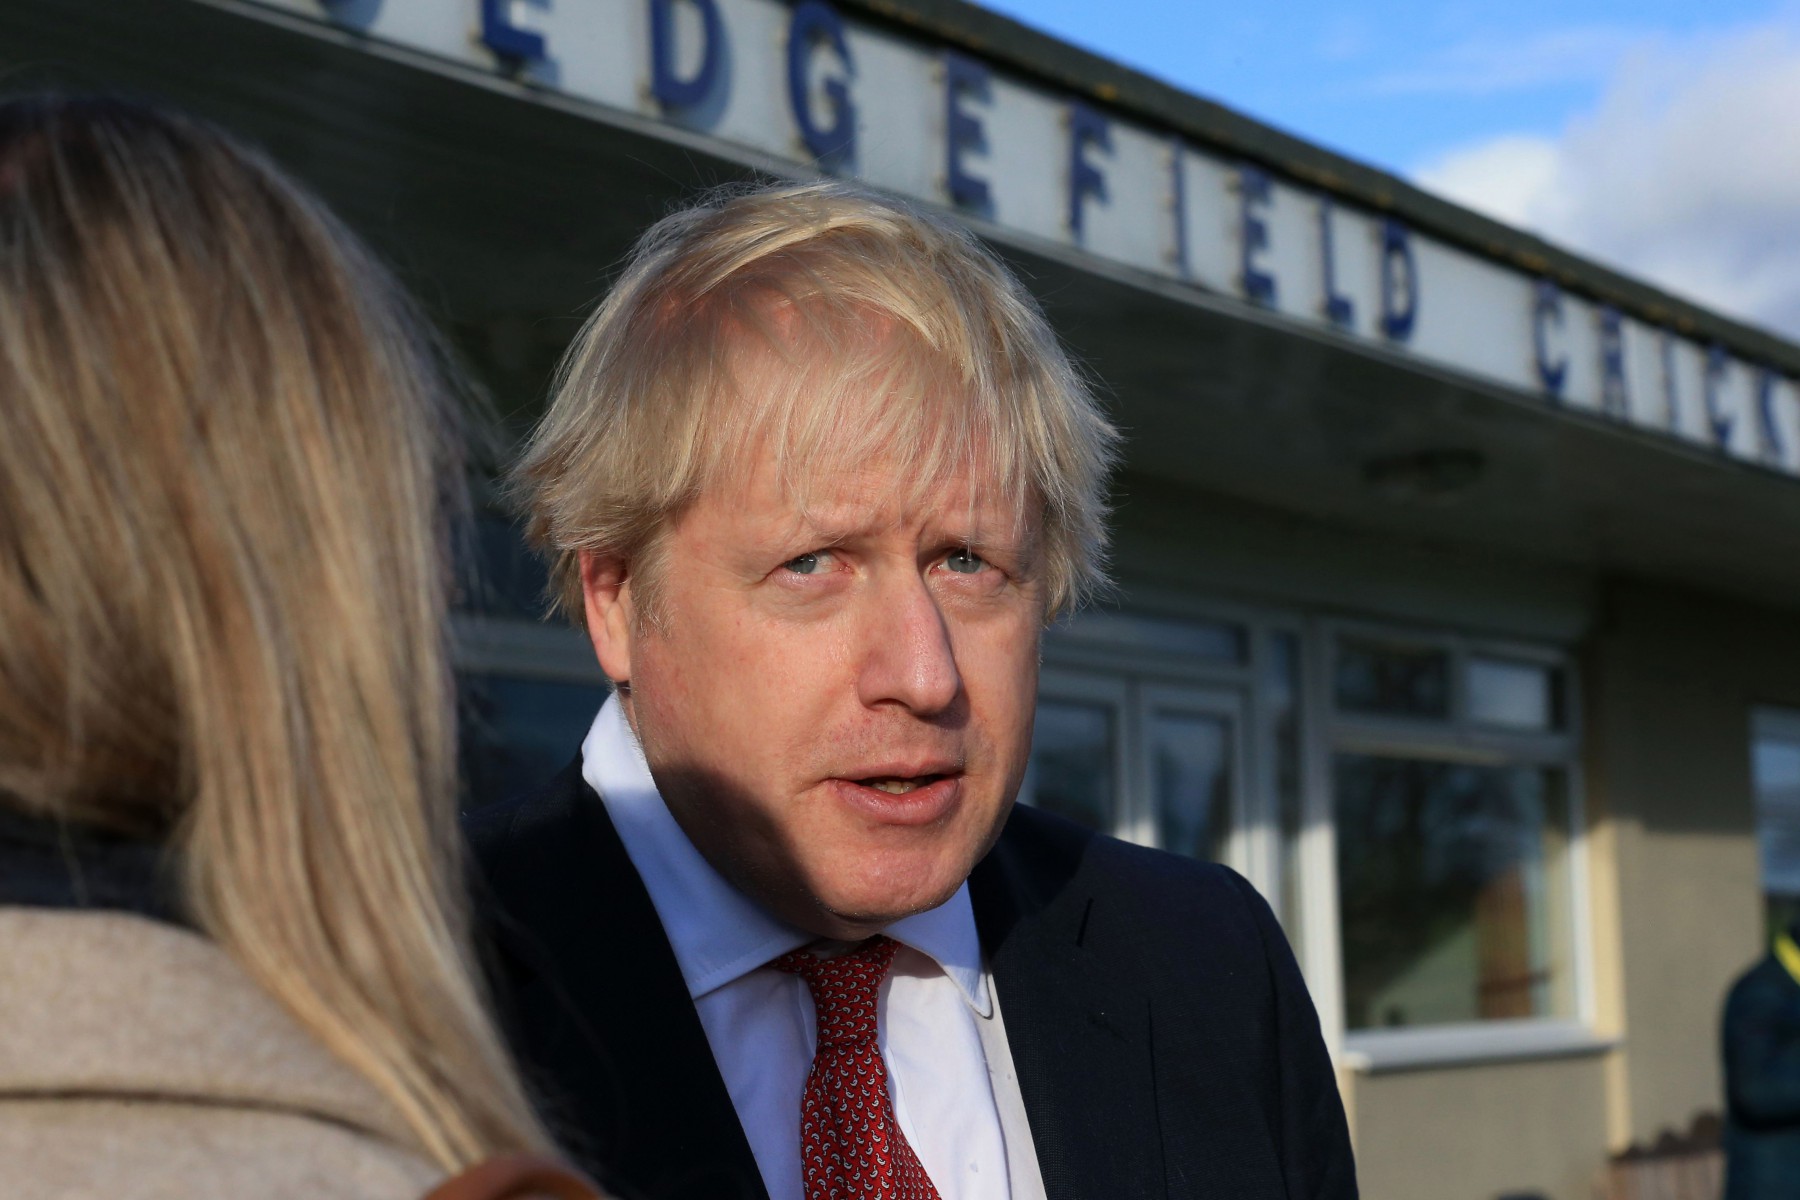 Boris Johnson faces threats of Scottish independence and a reunification referendum in Northern Ireland in the new Parliament